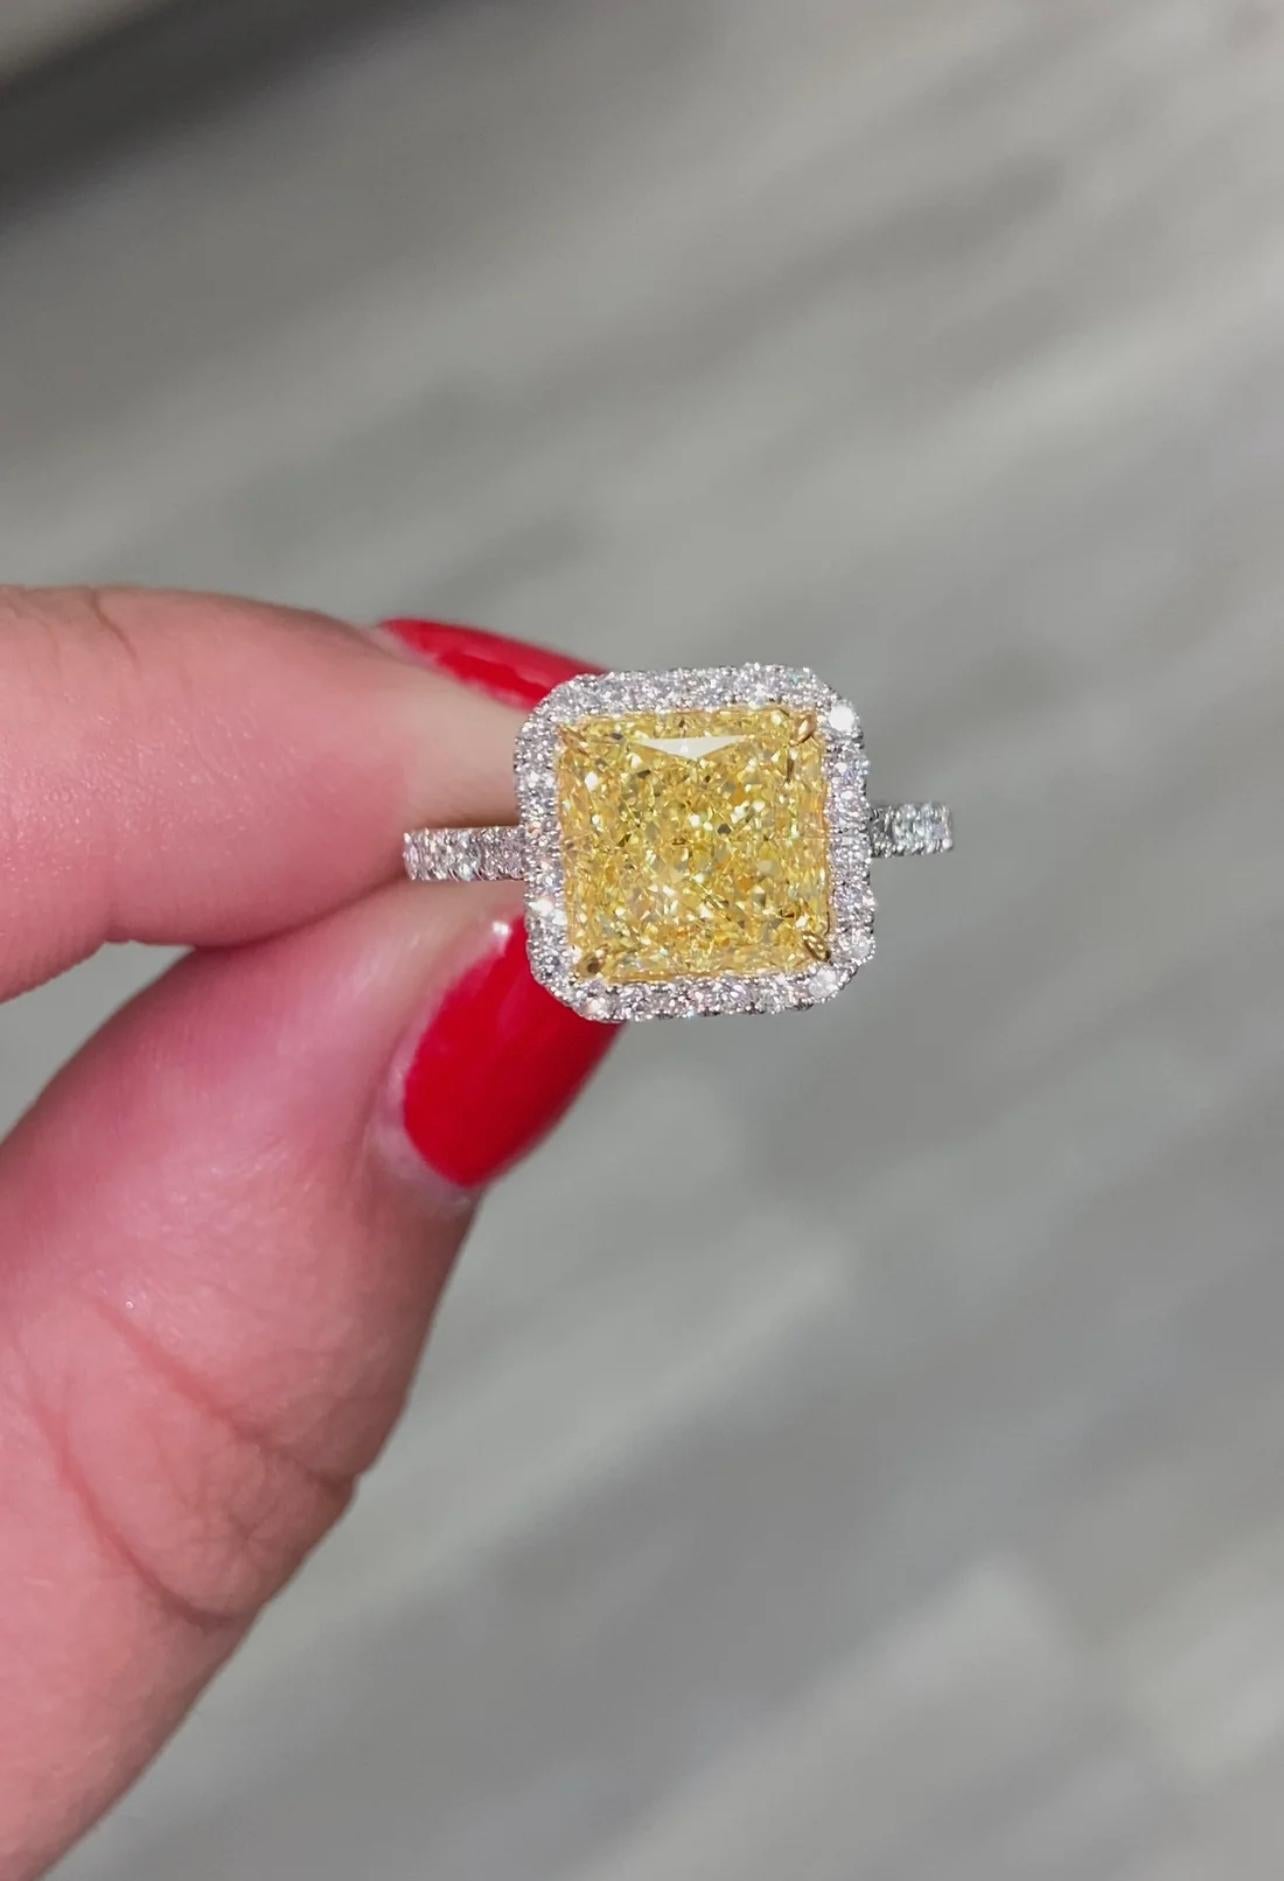 10/10 super gorgeous and fiery stone with color and fire spread throughout the entire stone, no loss of color on the sides

Lemon yellow color and excellent cutting

Set in Platinum and 18kt Yellow Gold with white diamond pave

Making Extraordinary